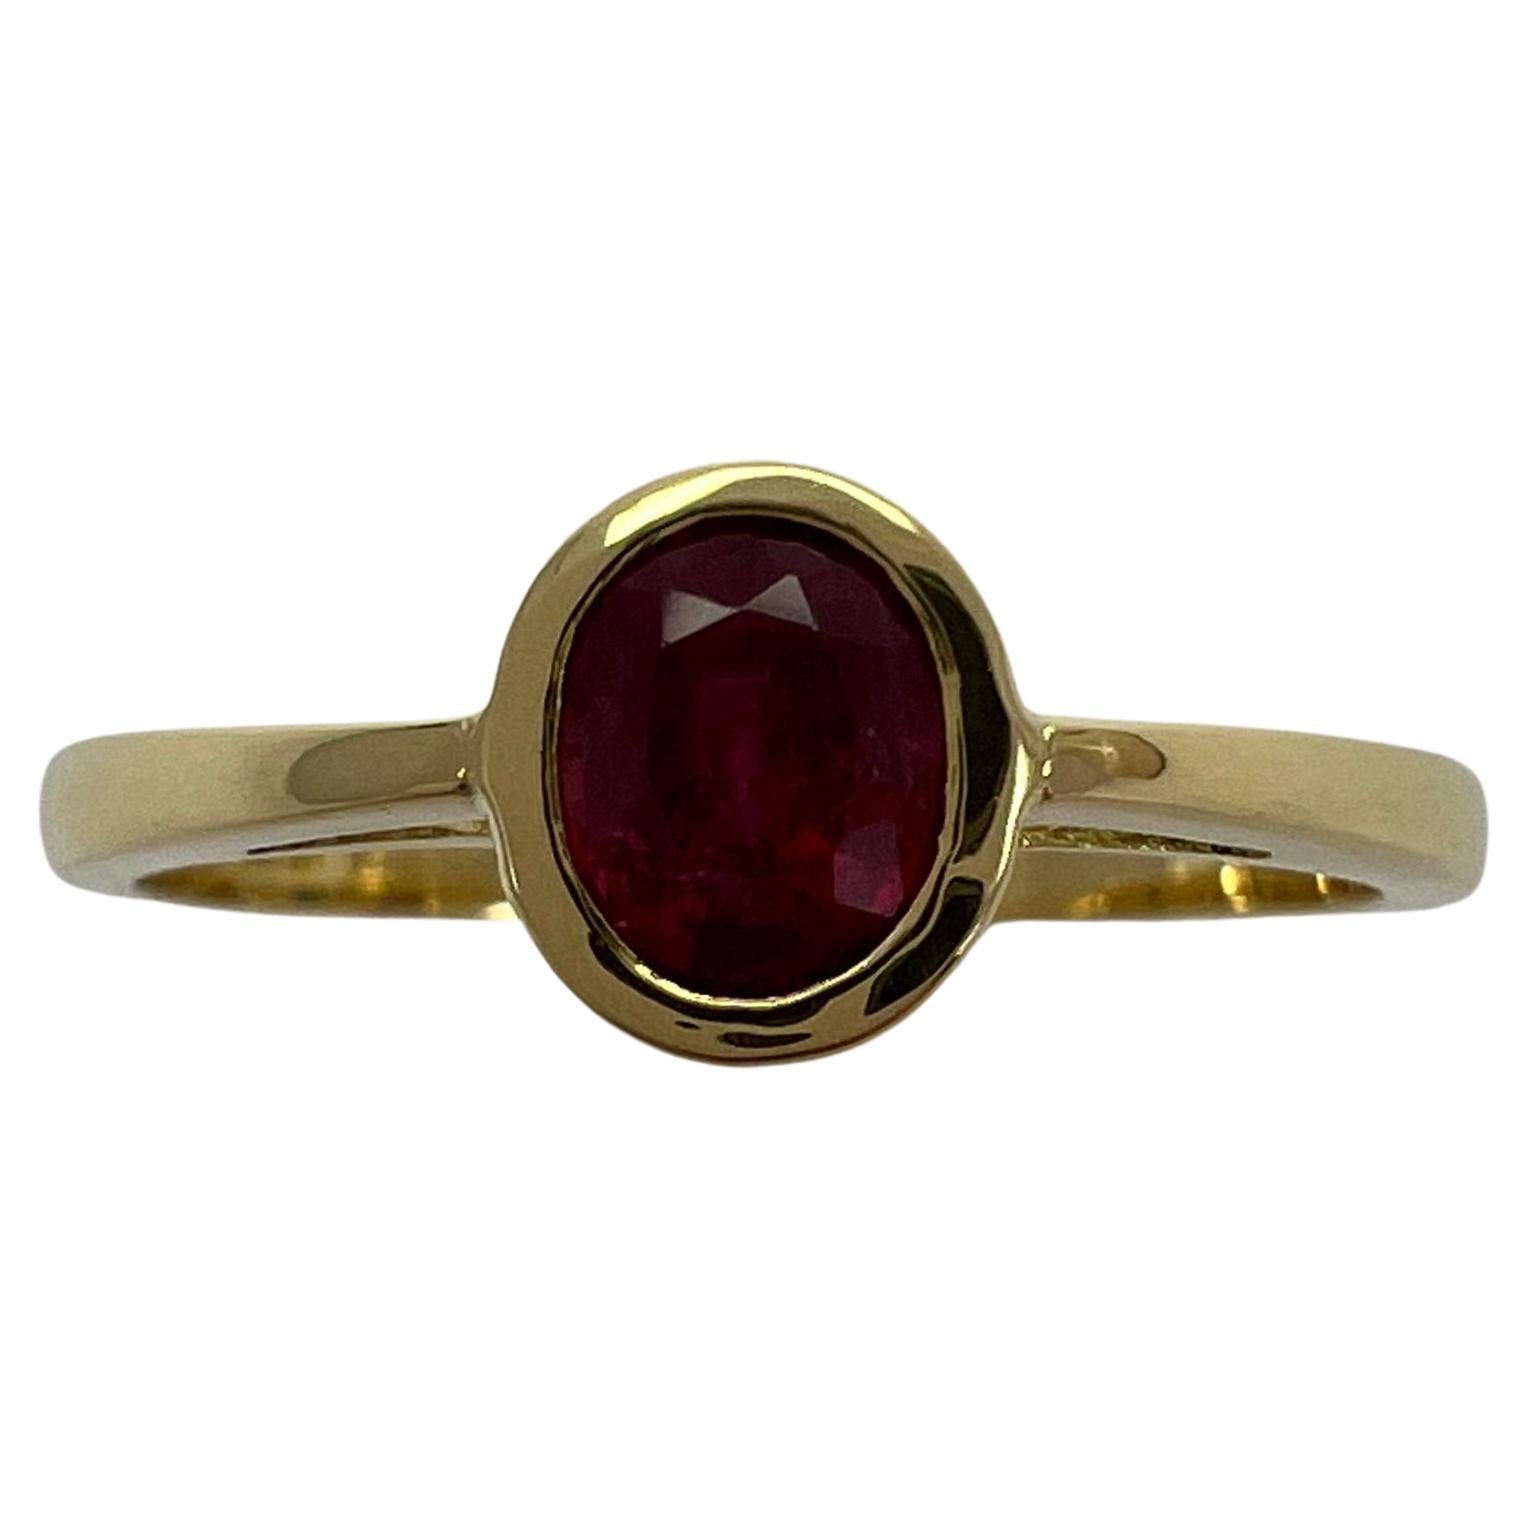 0,75ct Vivid Red Ruby Oval Cut 18k Gelbgold Lünette Rubover Solitaire Ring